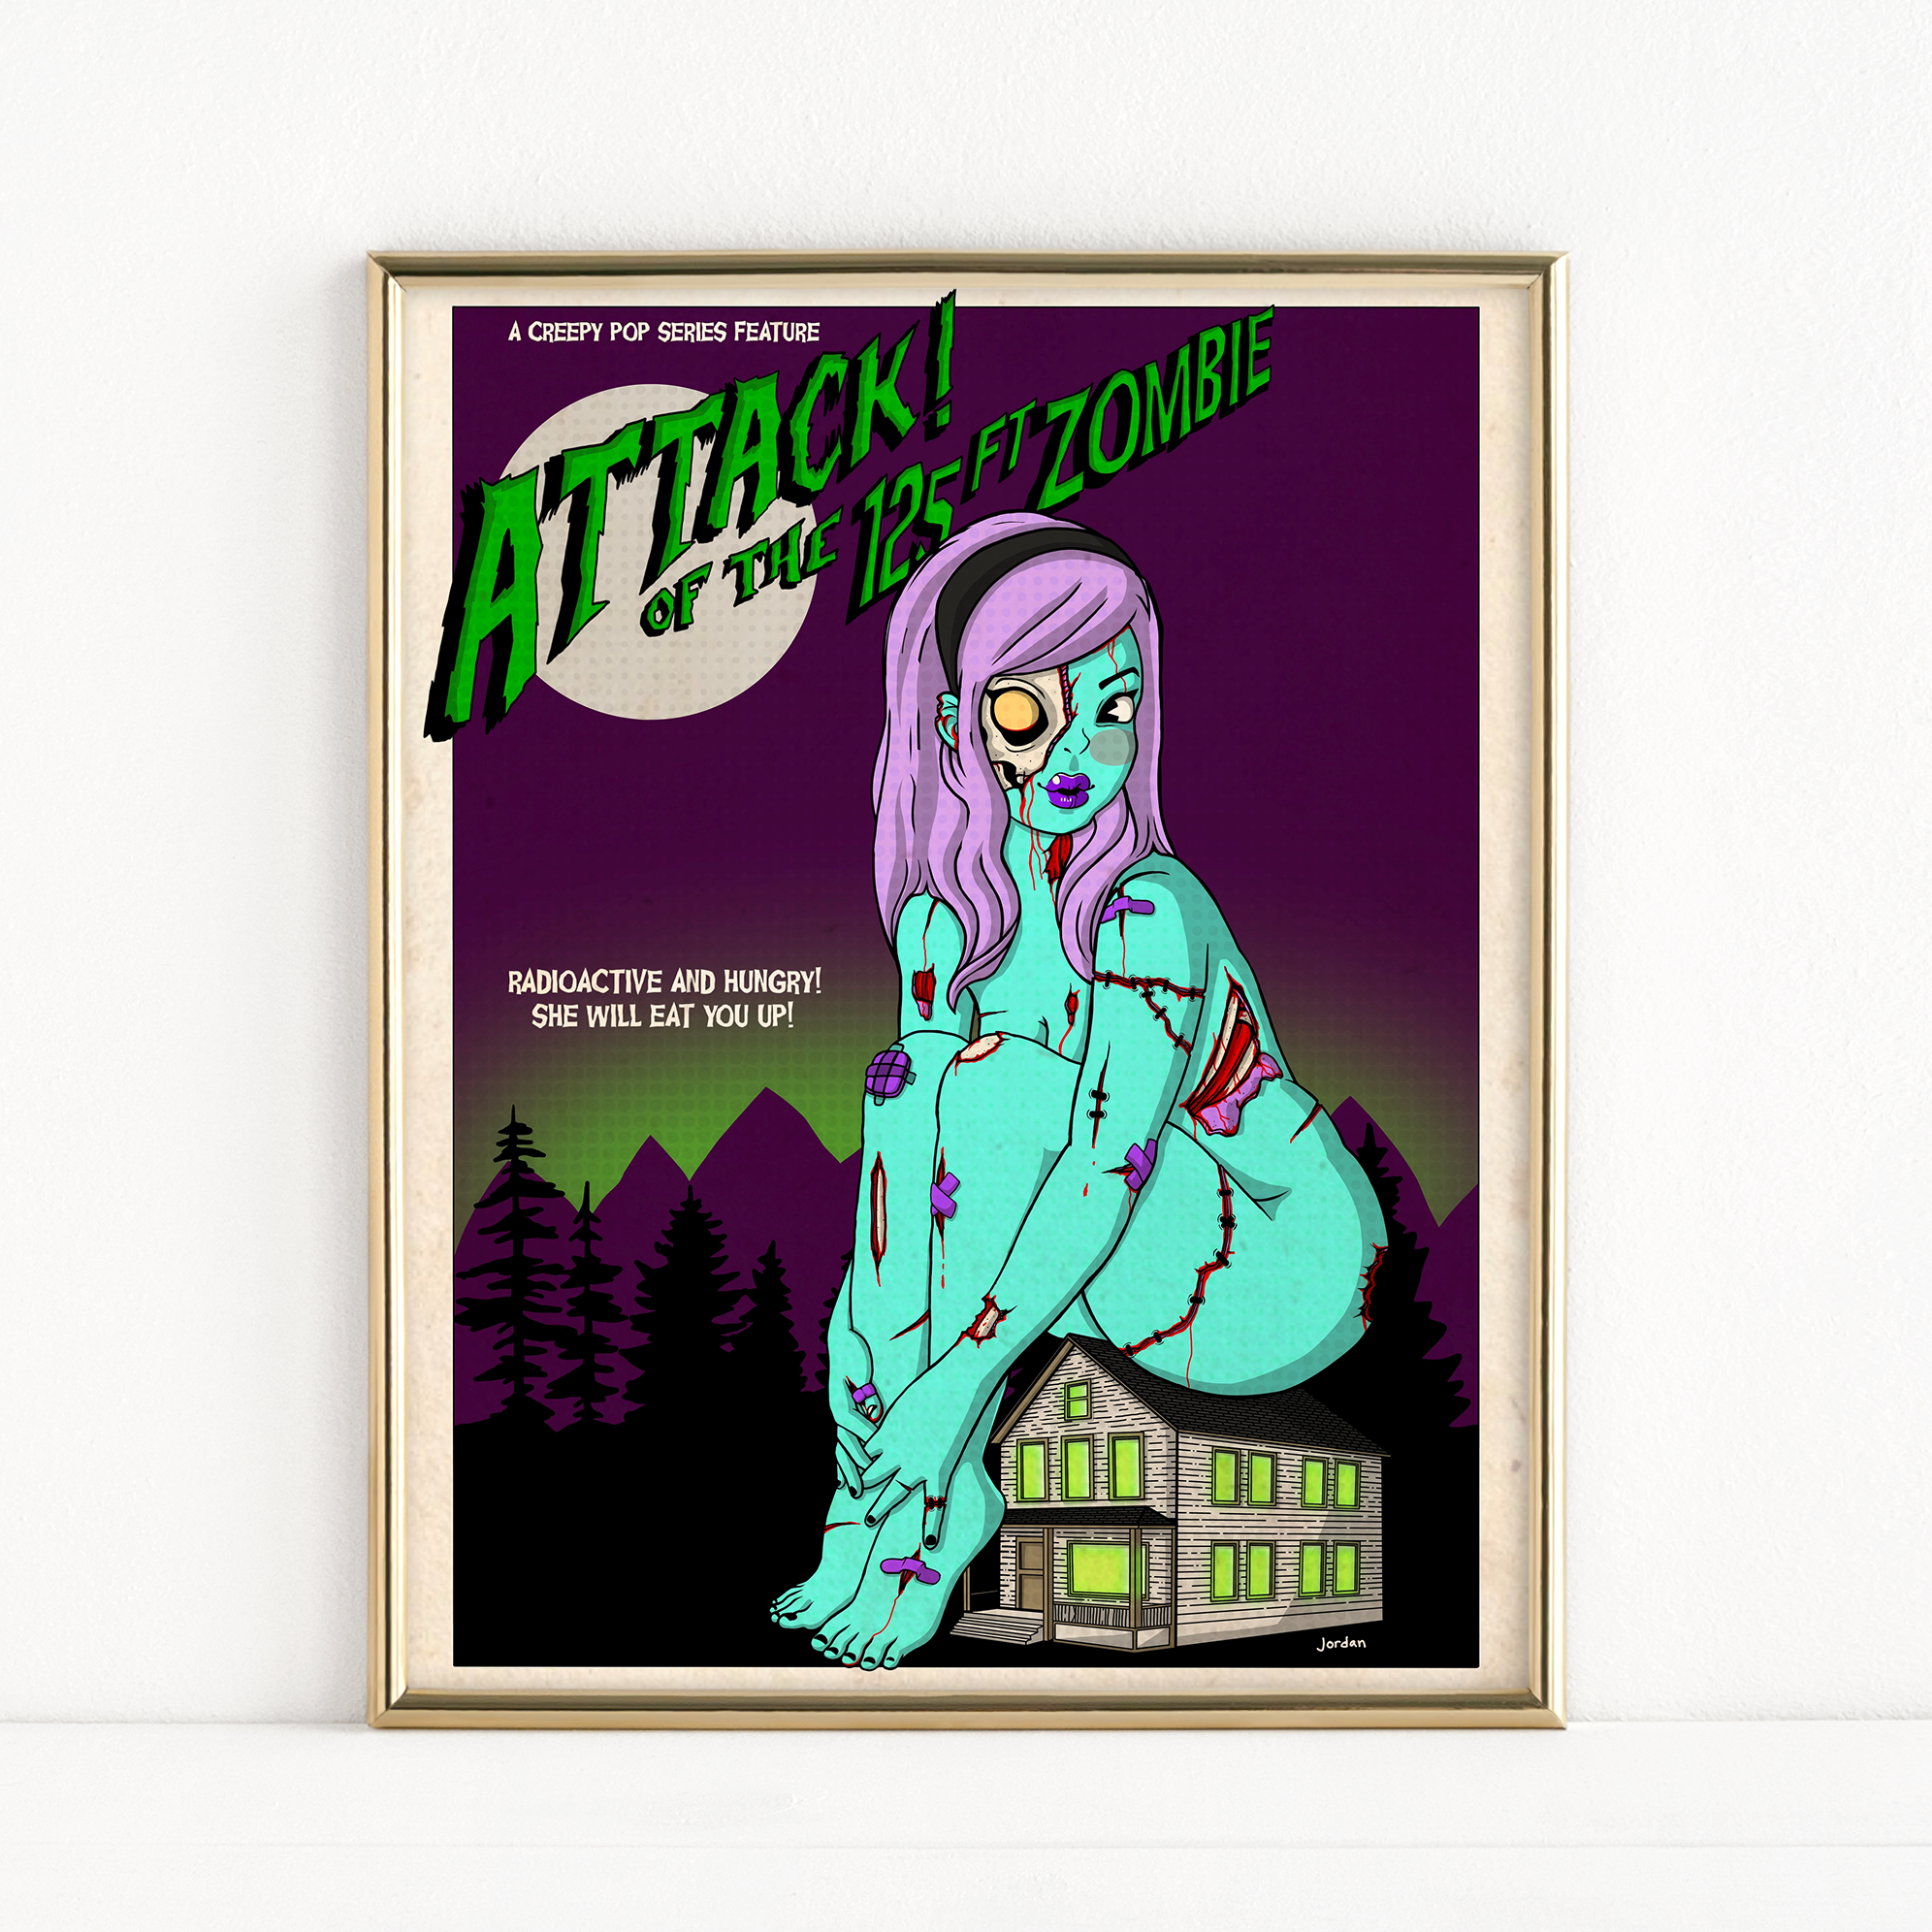 "Attack! Of the 125ft Zombie" - Fine Art Print